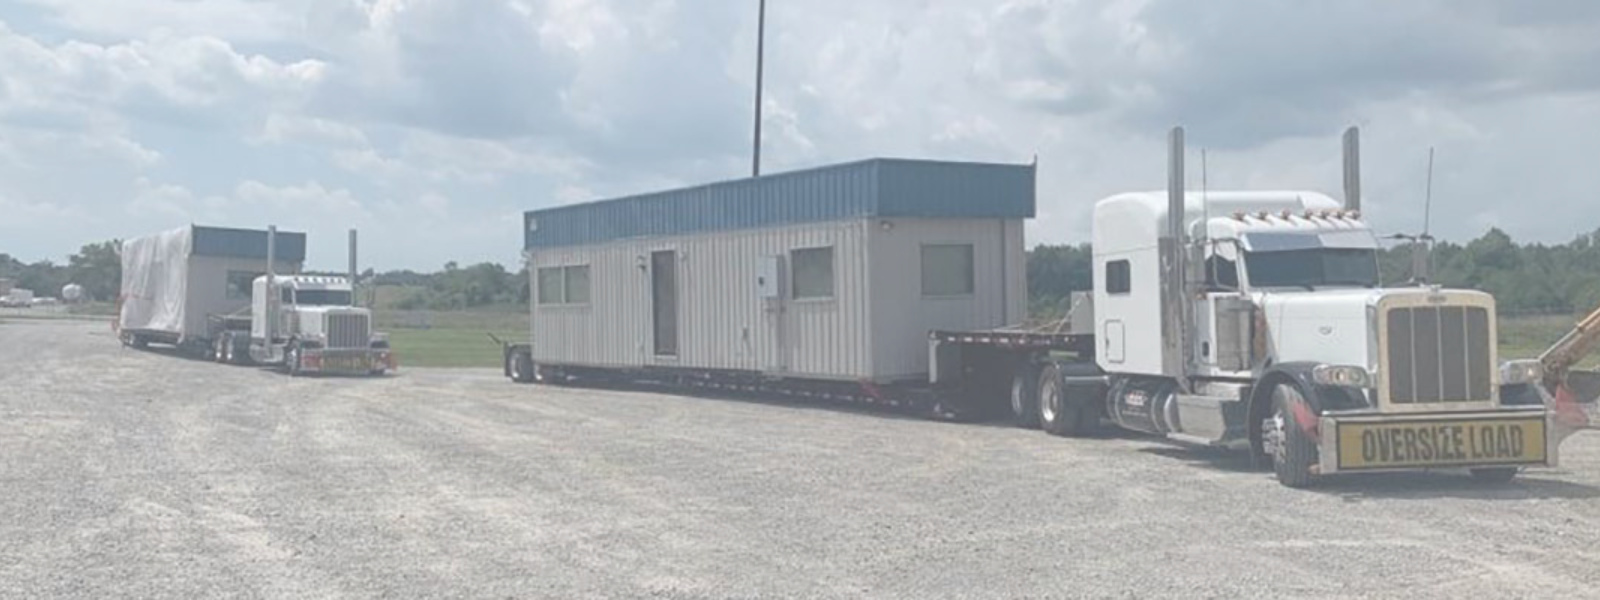 Is renting a modular building or portable classroom your best option?